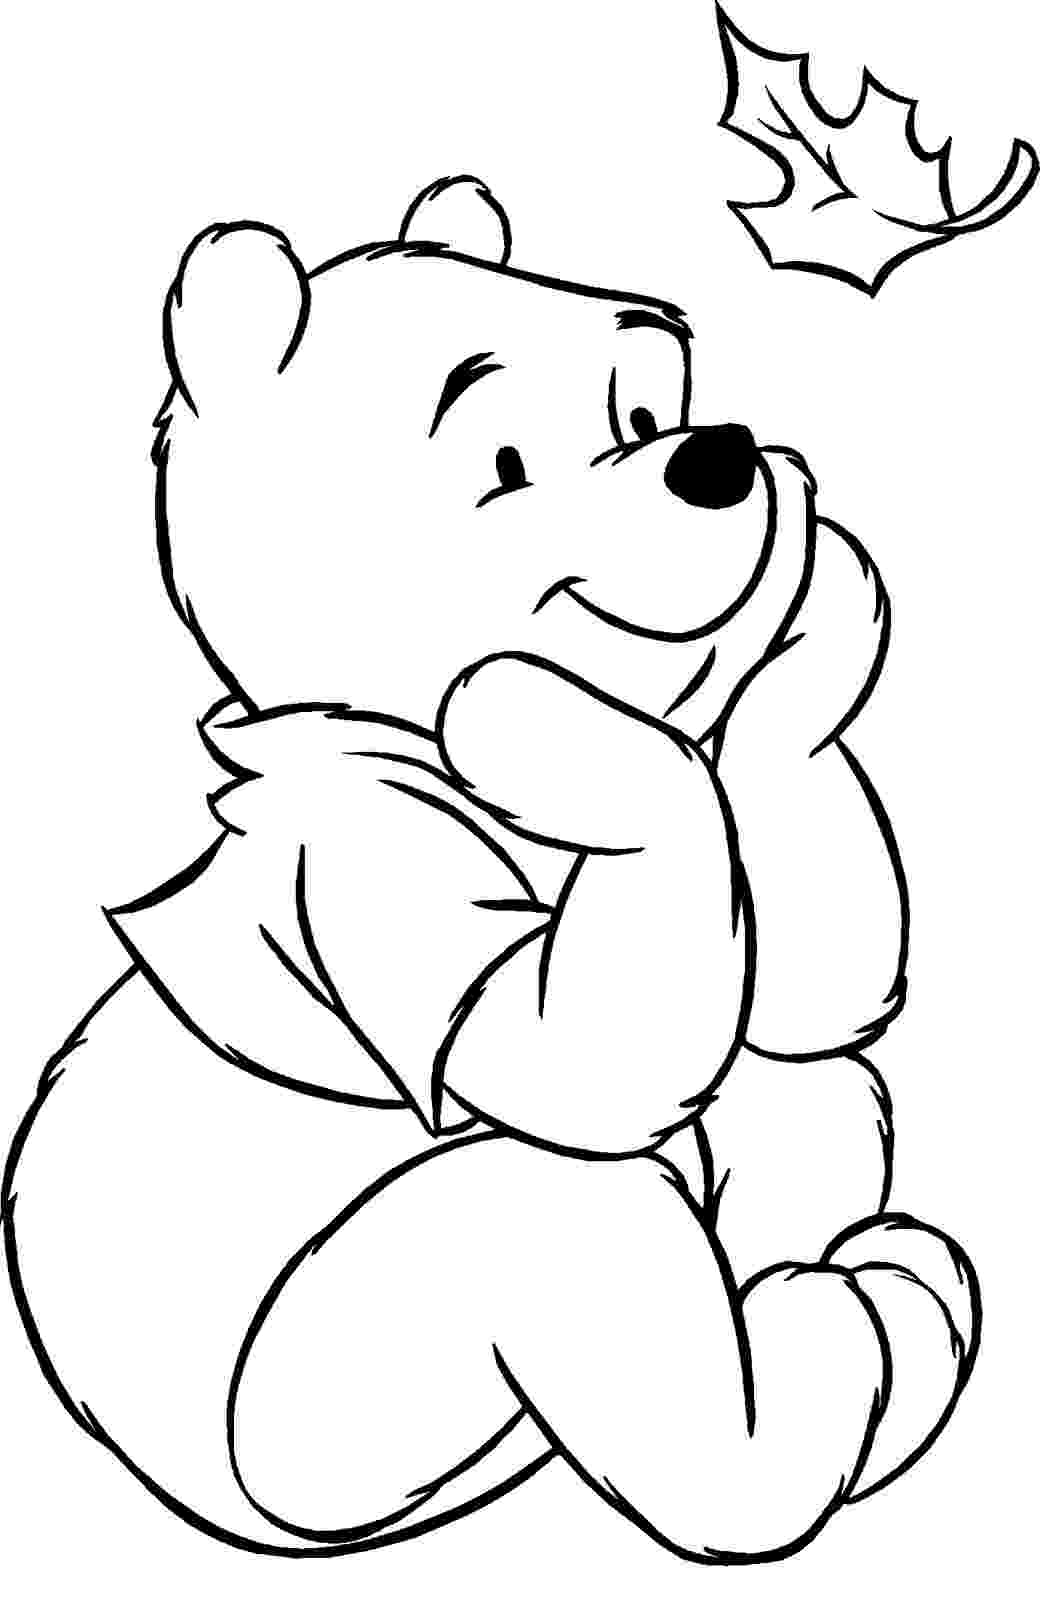 printable winnie the pooh coloring pages free printable winnie the pooh coloring pages for kids coloring winnie pooh pages printable the 